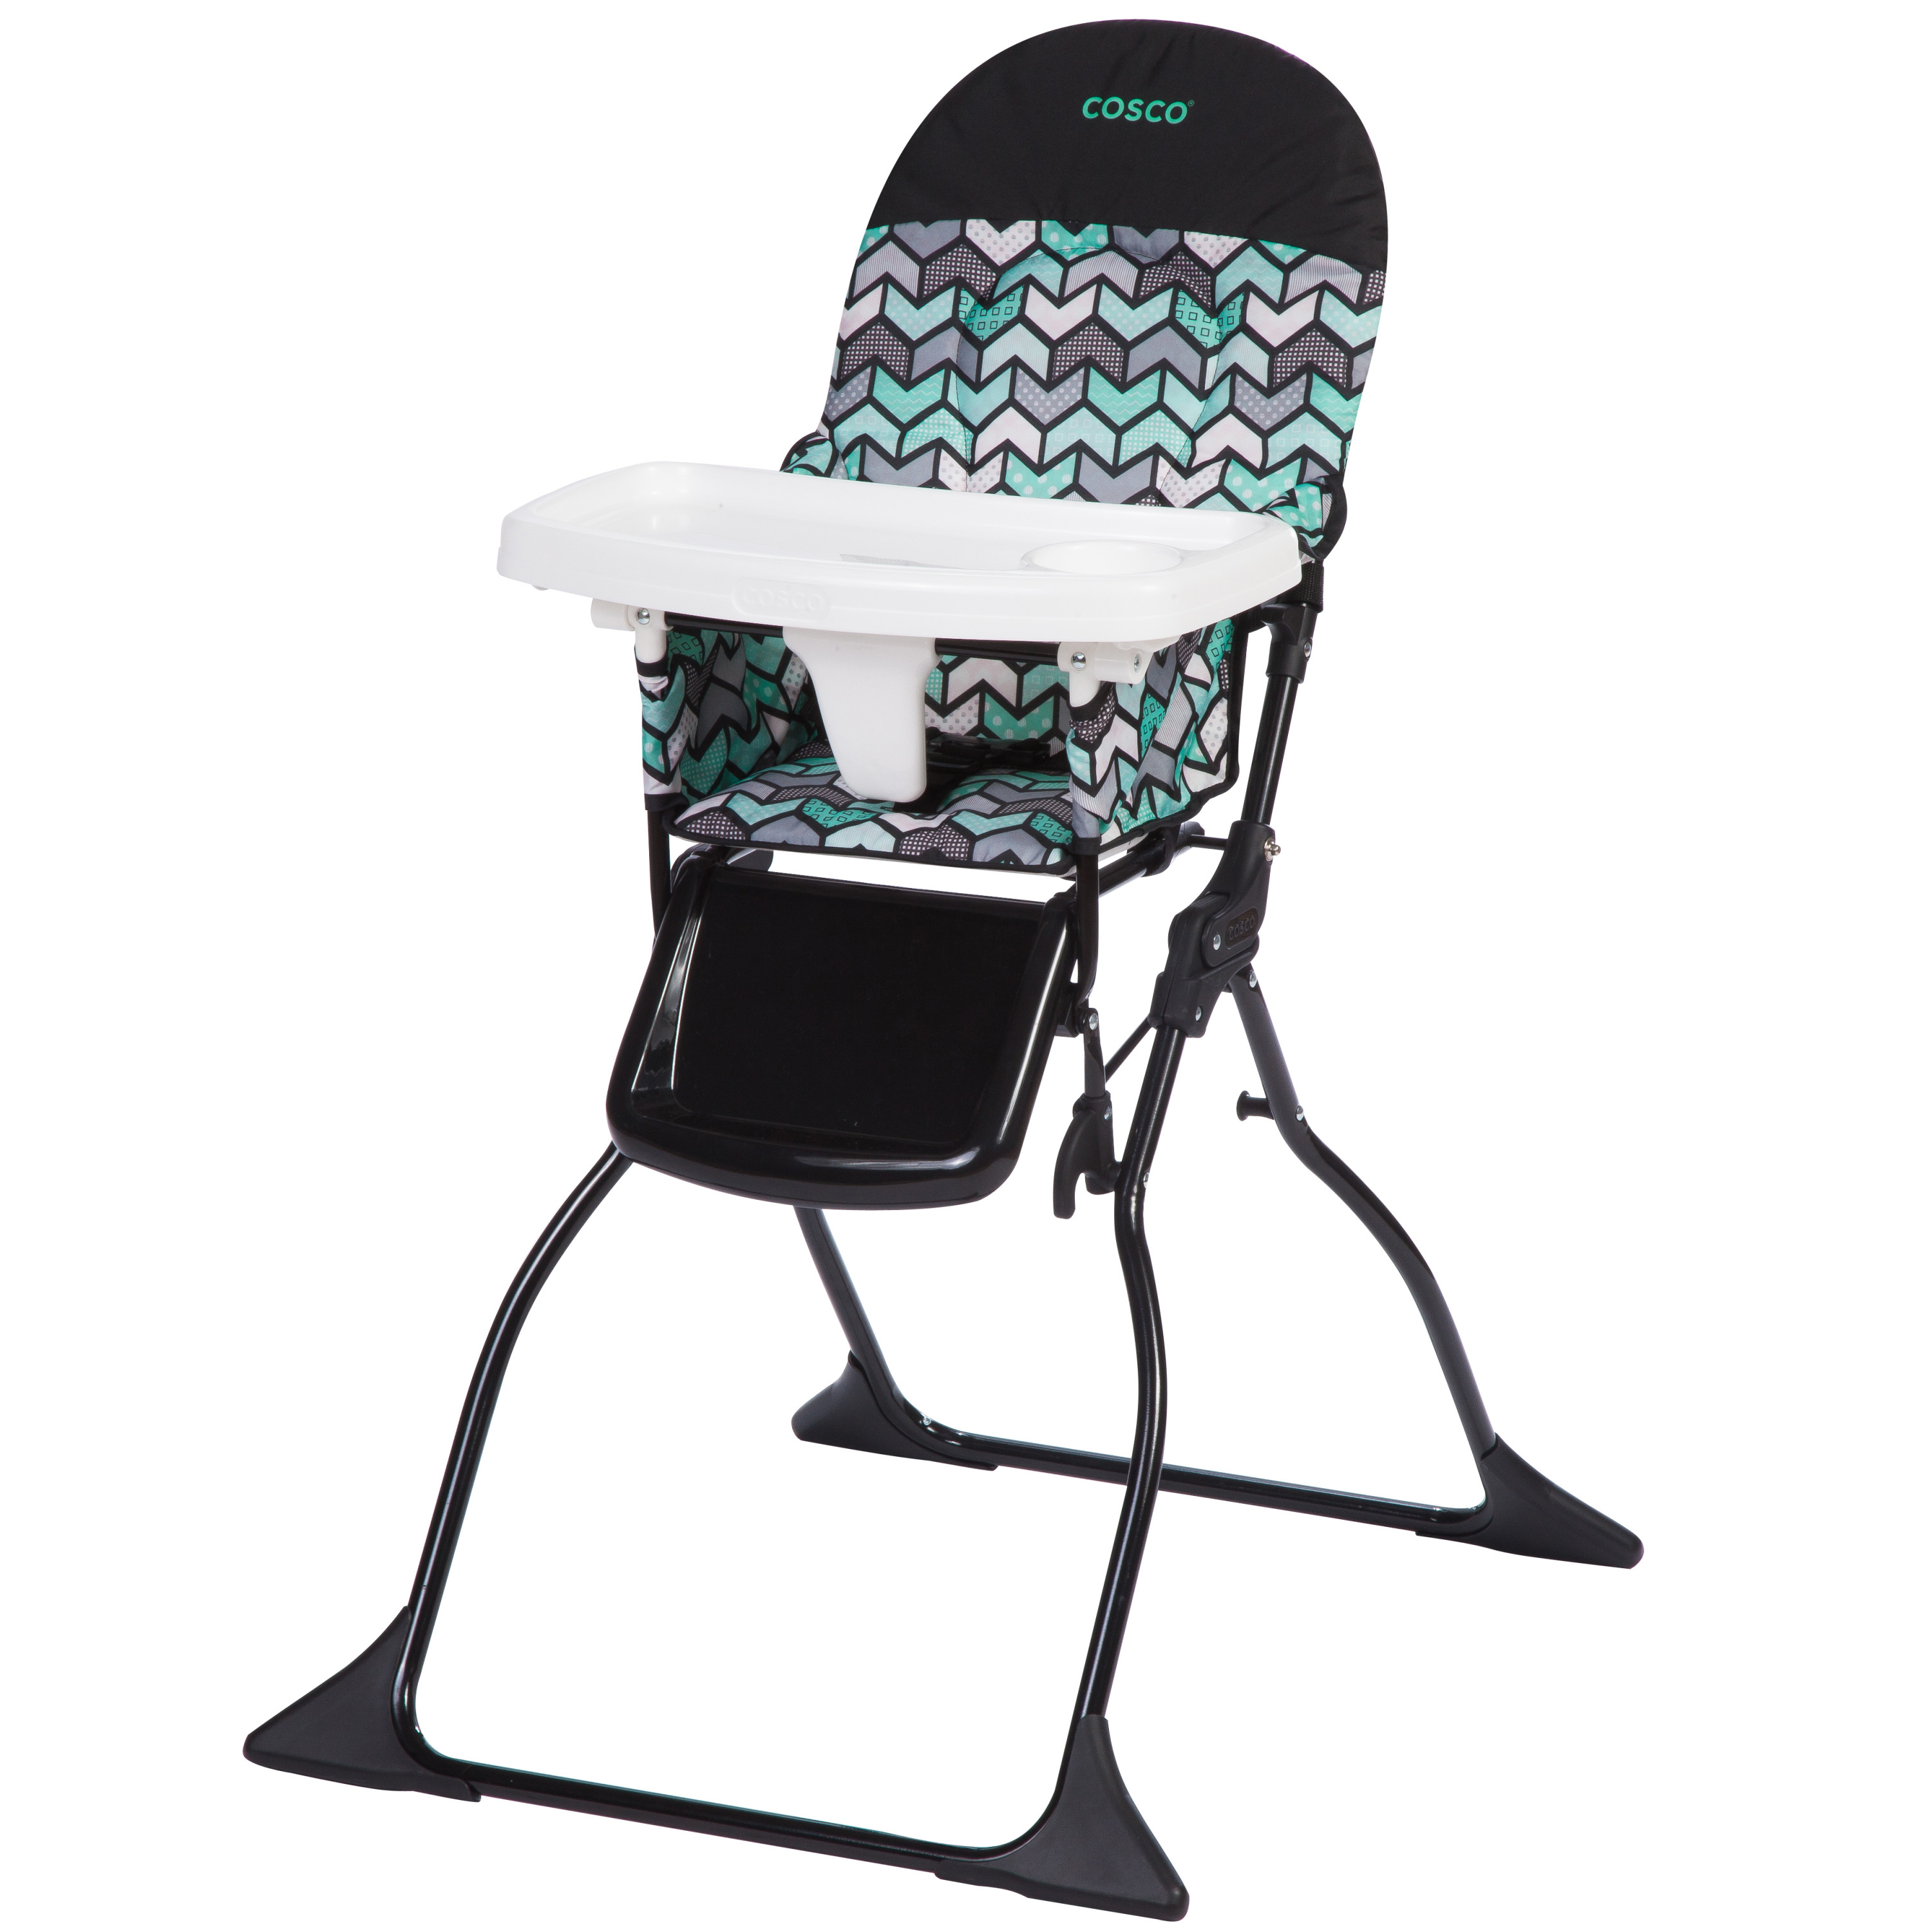 Cosco Kids Simple Fold Full Size High Chair with Adjustable Tray, Spritz - image 1 of 13